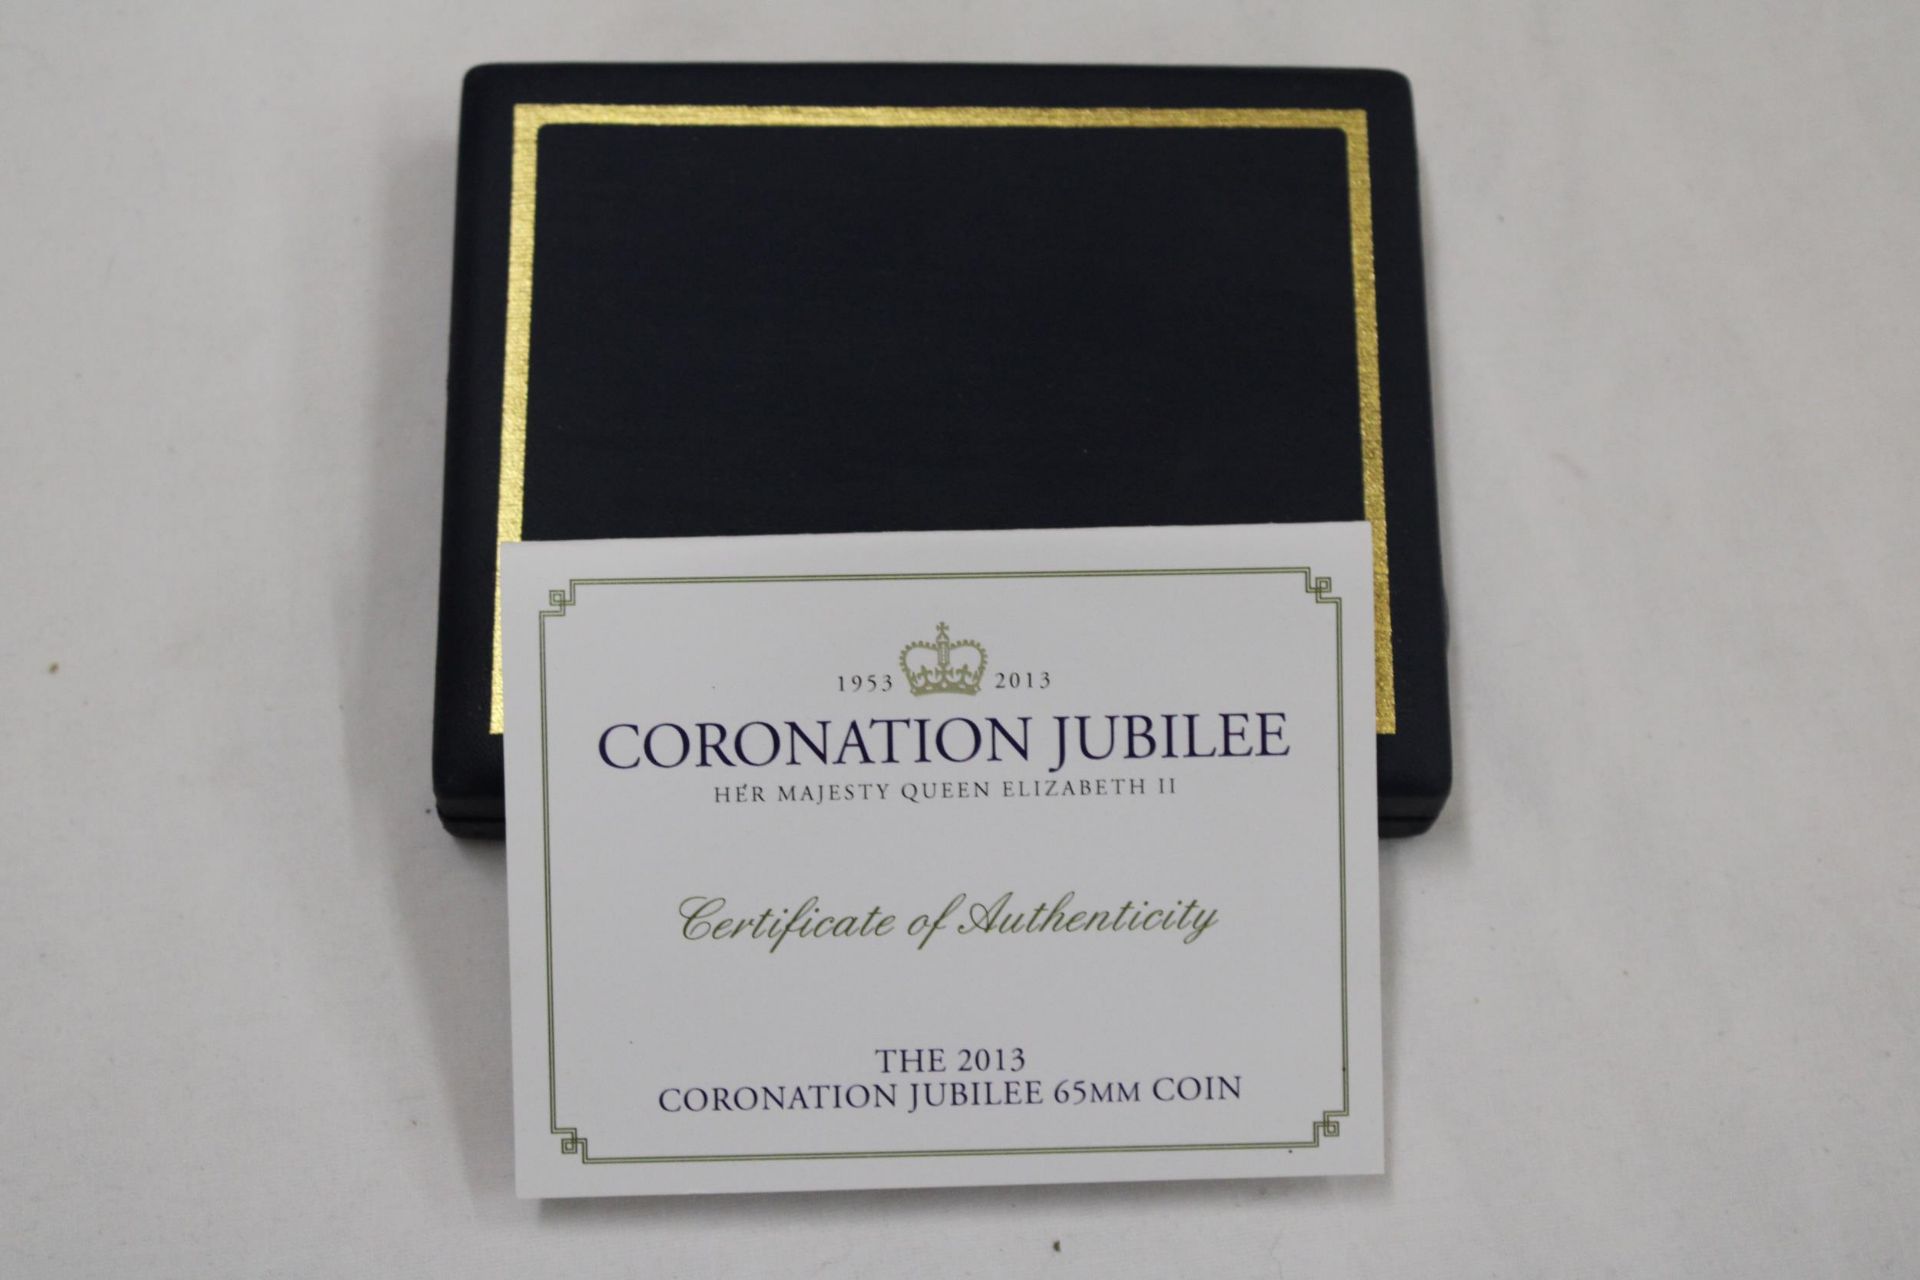 A BOXED 2013 CORONATION JUBILEE 65MM COIN WITH CERTIFICATE OF AUTHENTICITY - Image 4 of 4